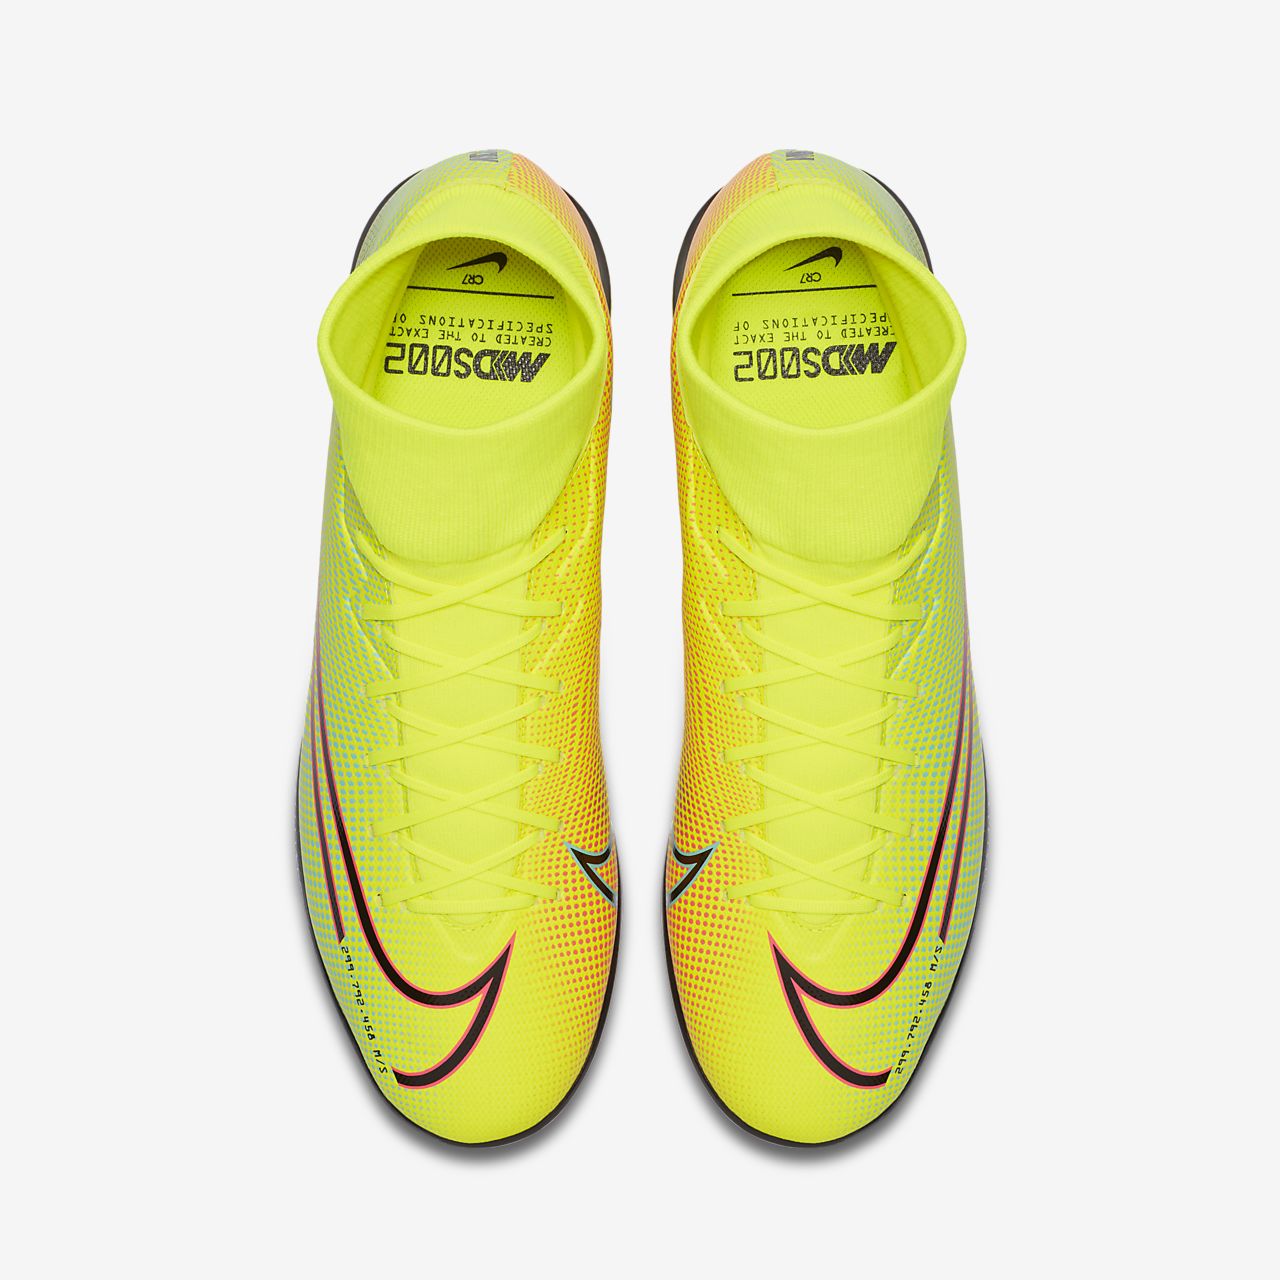 Nike JR MERCURIAL SUPERFLY 7 ACADEMY MDS FGMG.